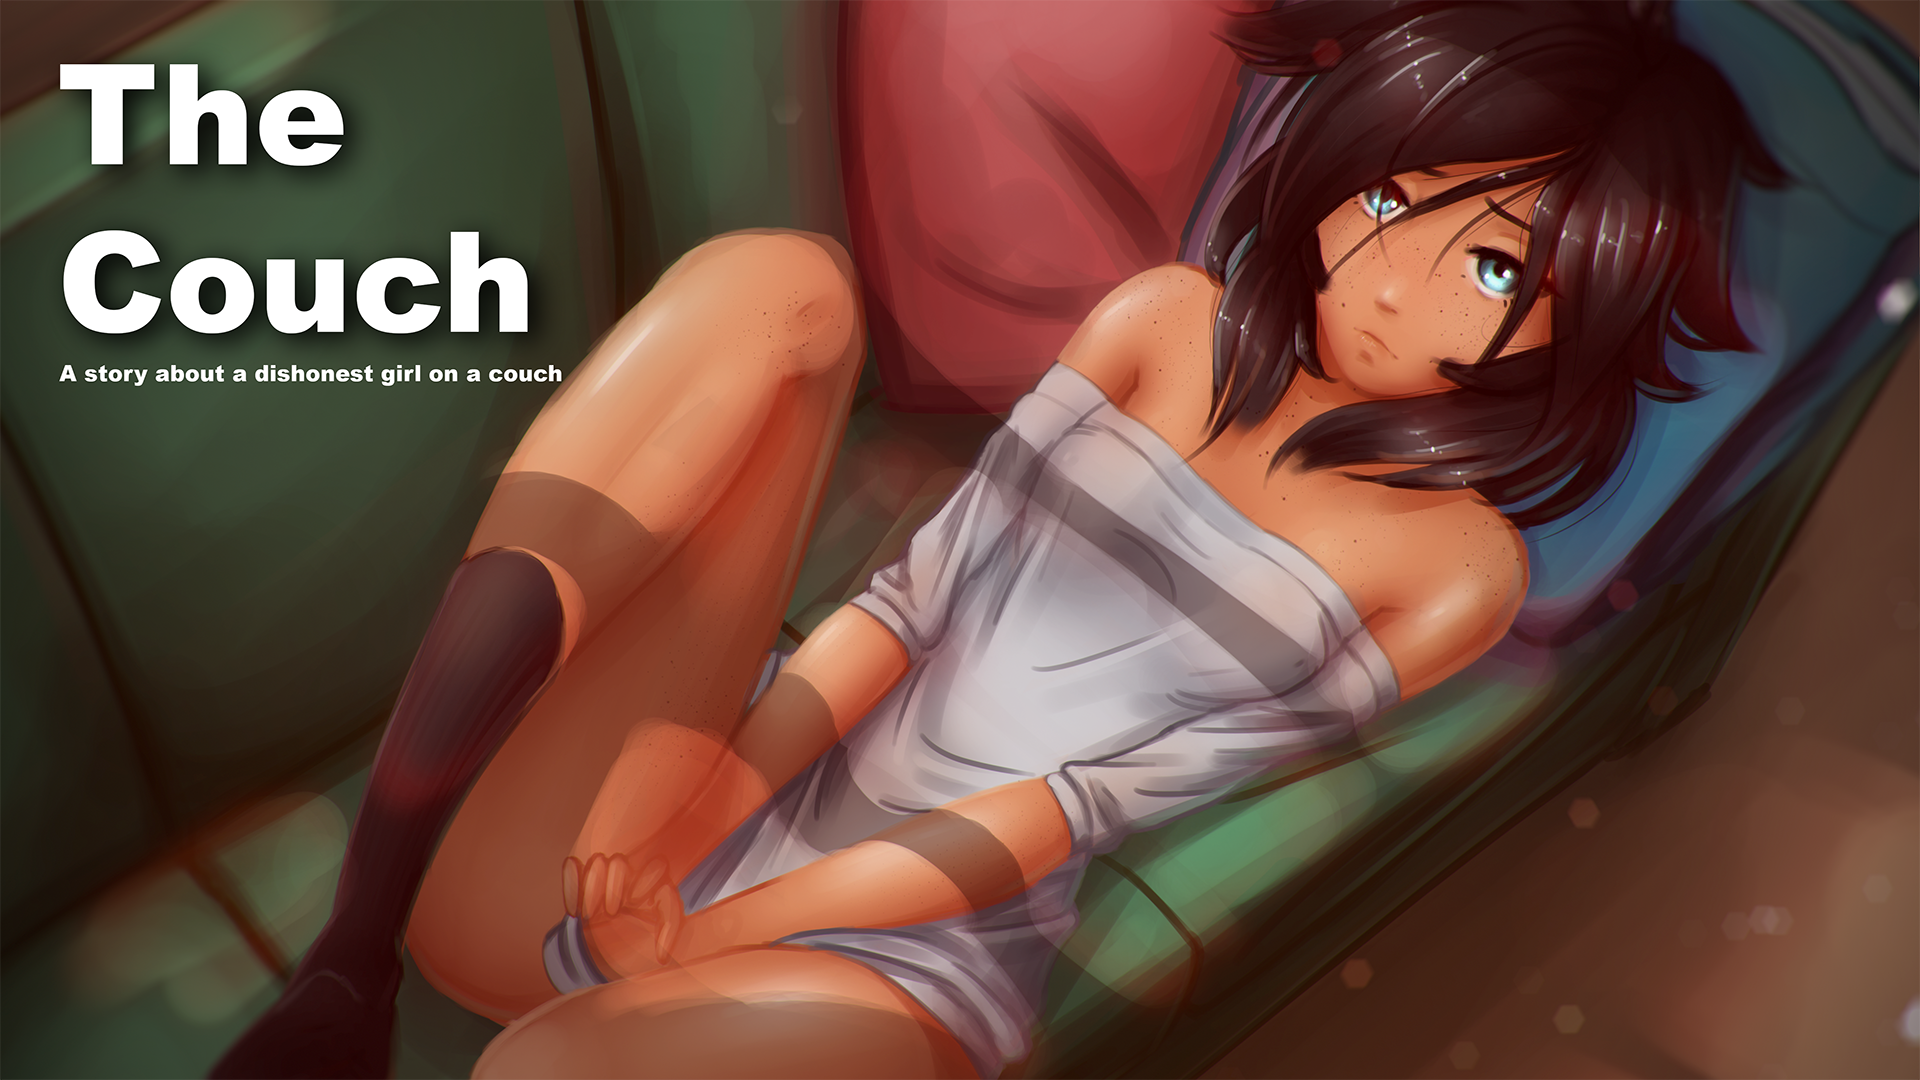 Hentai Rear - The Couch by Momoiro Software, Sacb0y, MiNT